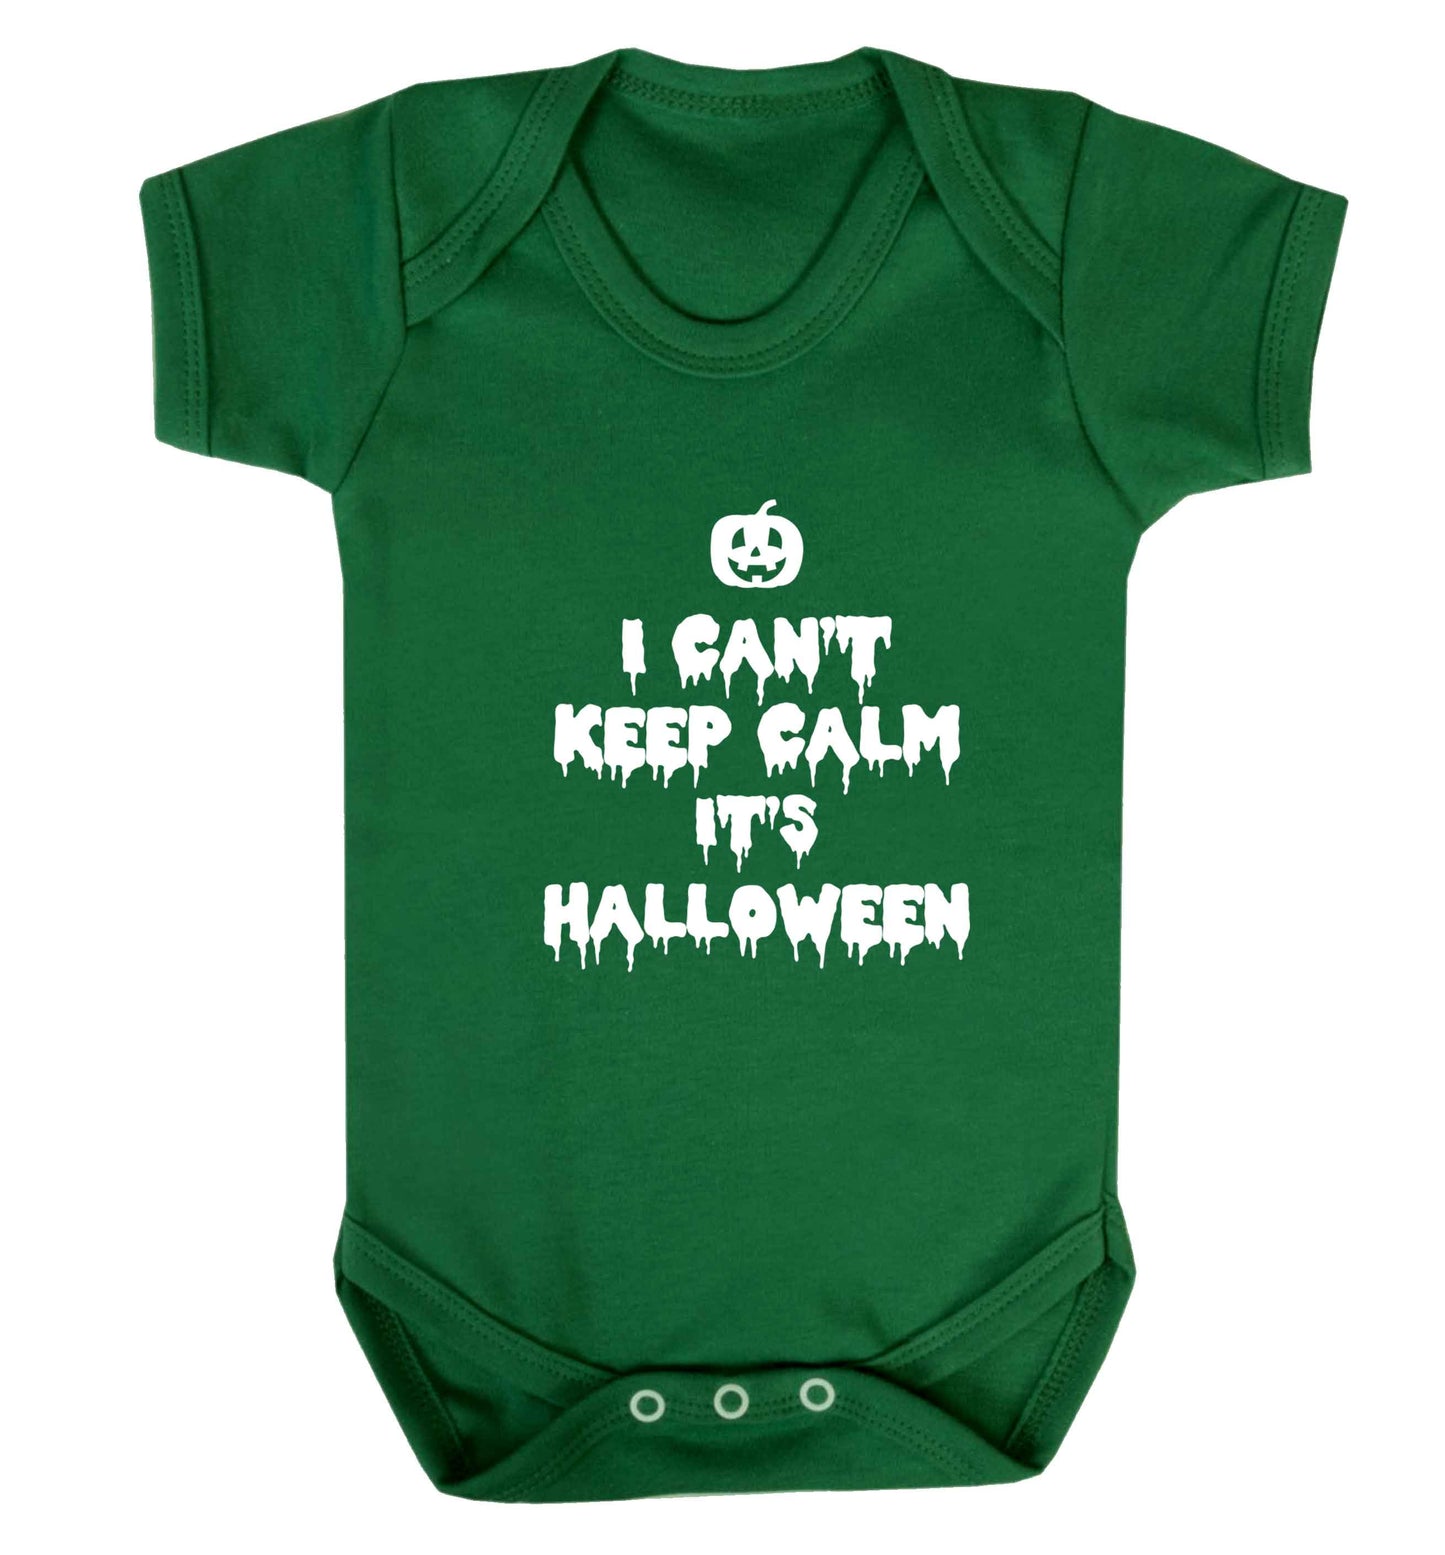 I can't keep calm it's halloween baby vest green 18-24 months